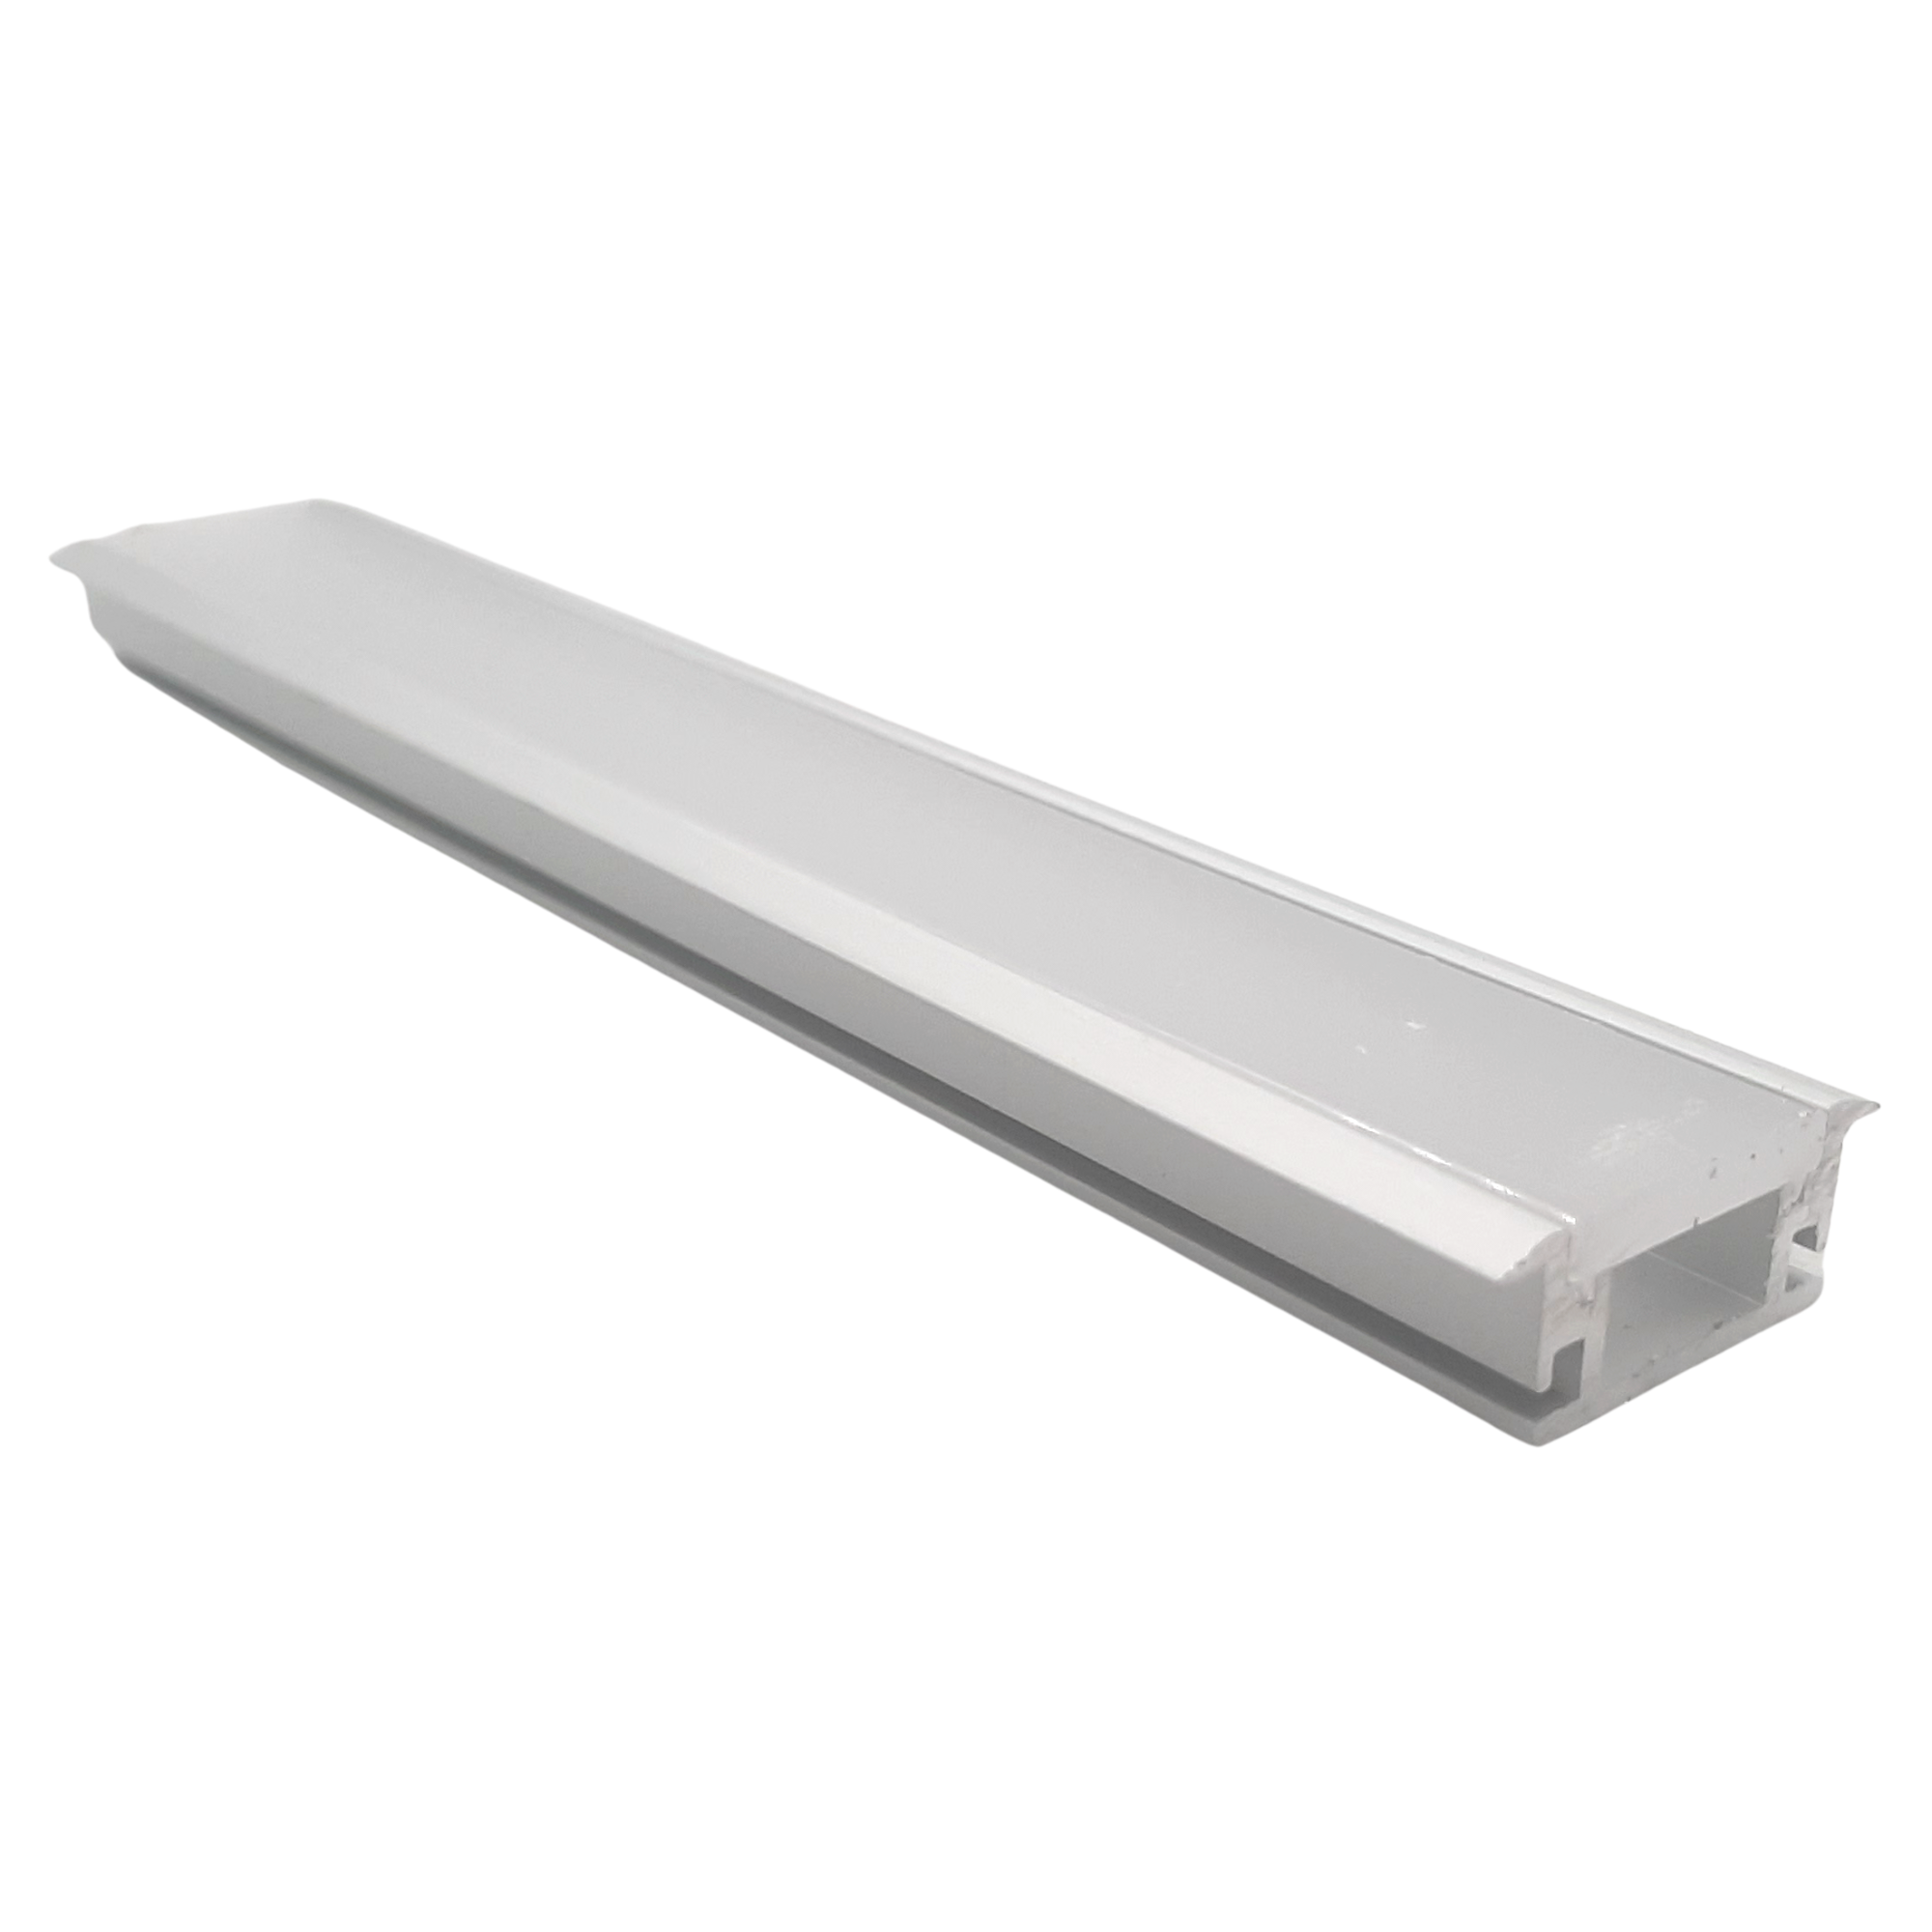 RSA-10 Walkover LED Extrusion for LED Ribbon Strip